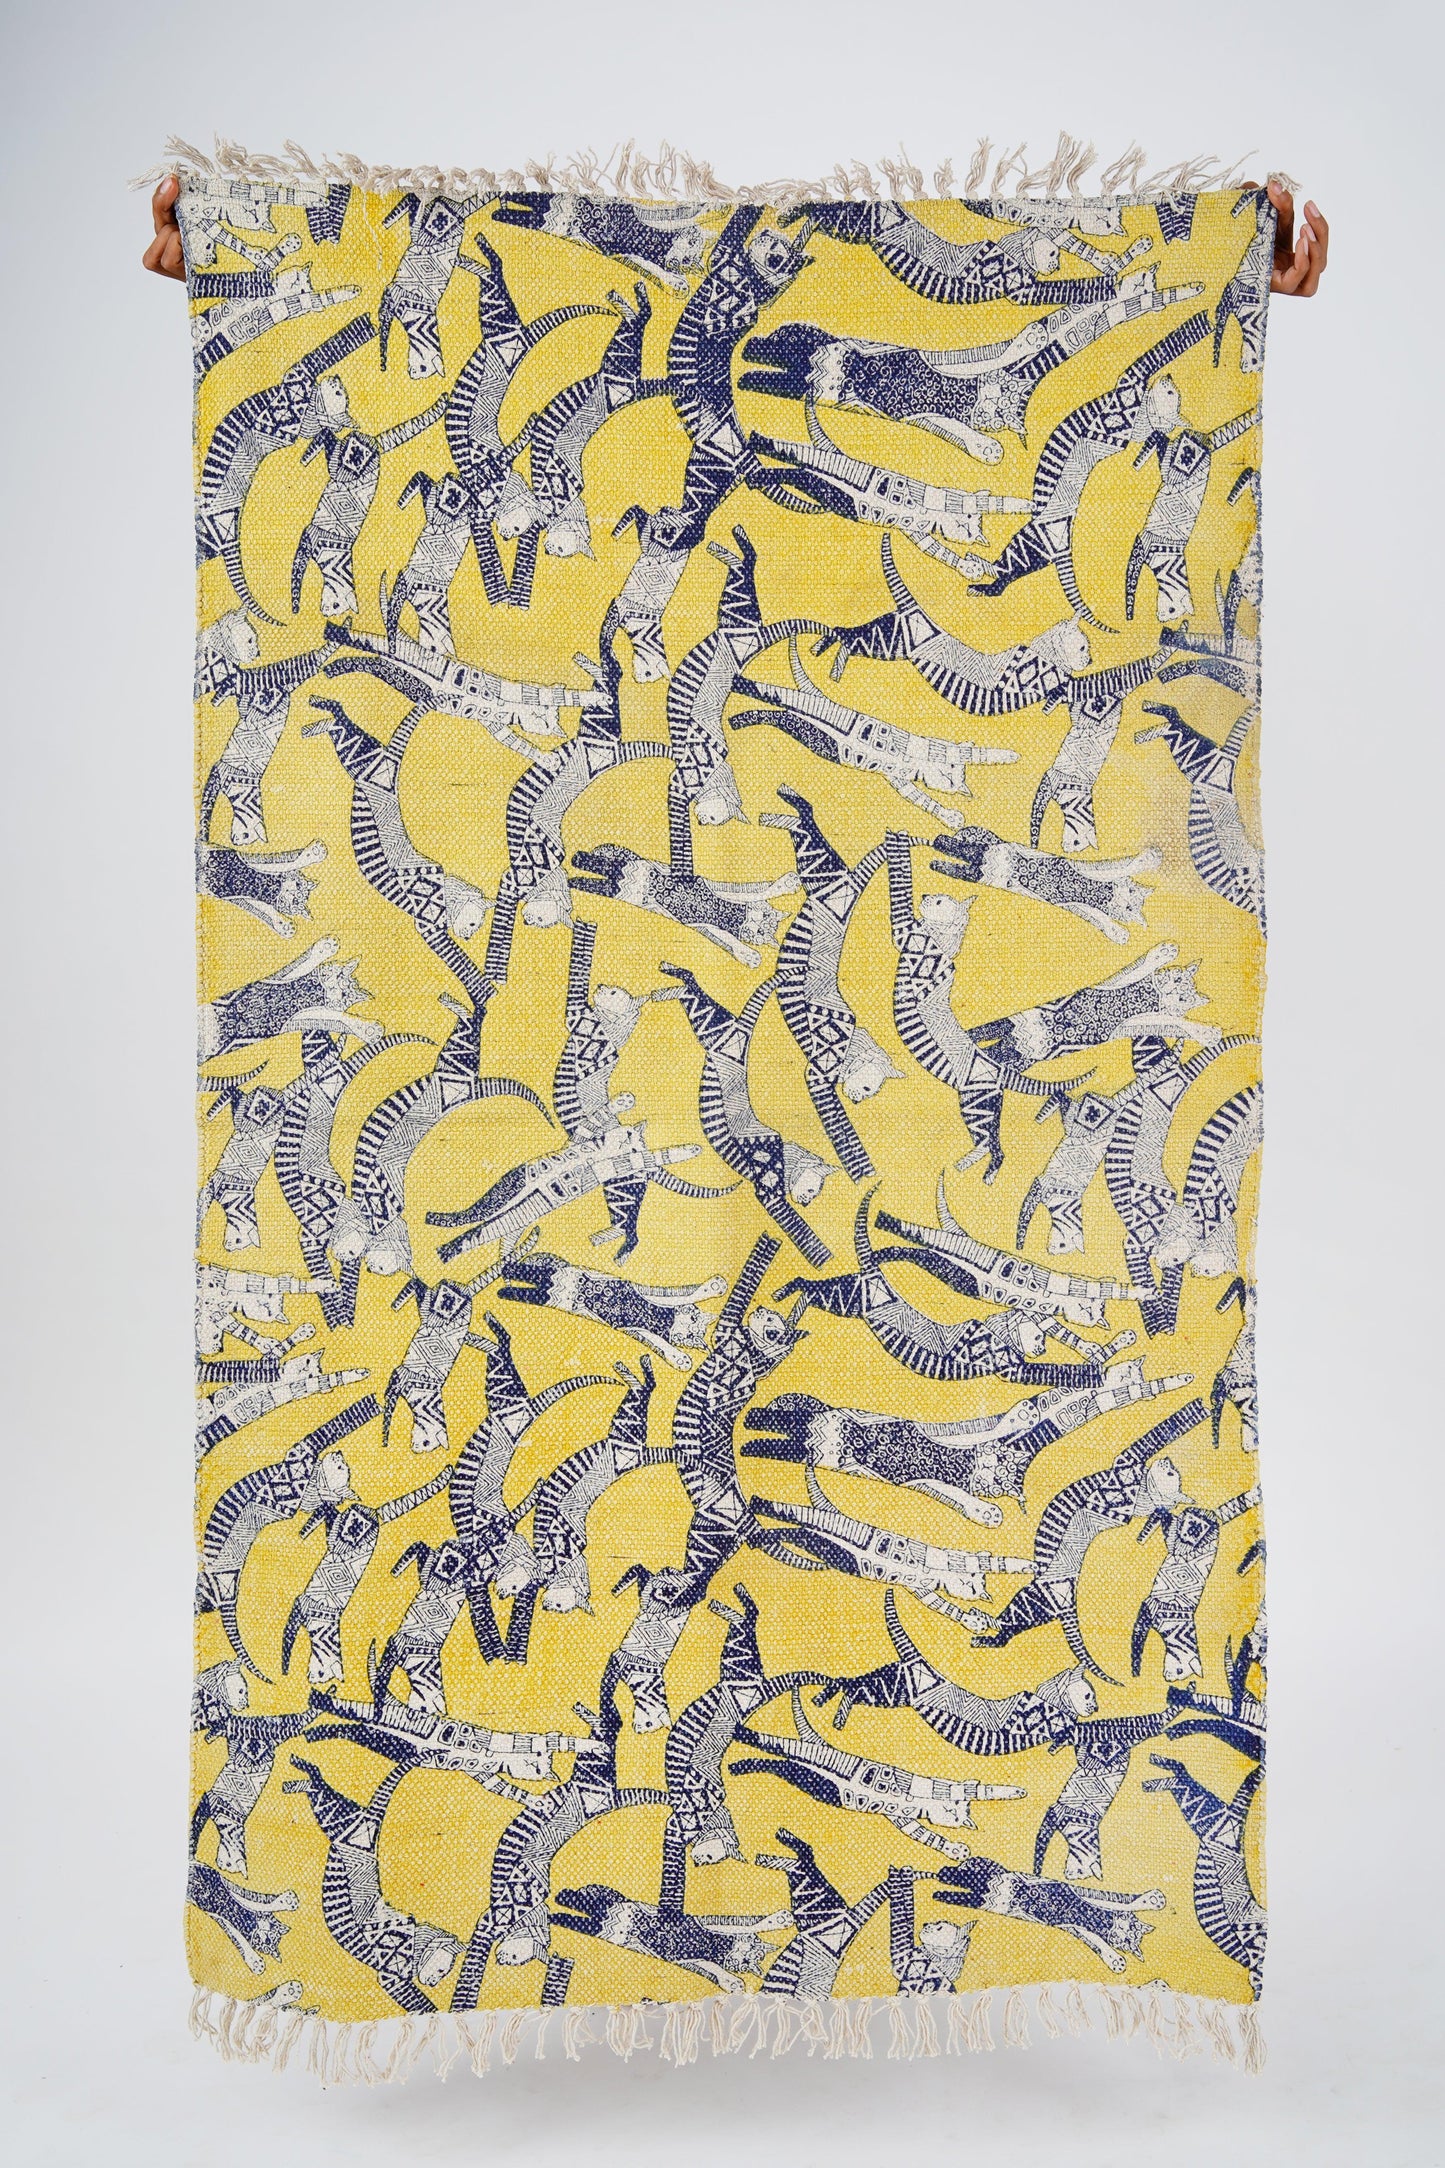 3 x 5 ft Cotton Area Rug Printed -Cat Party Yellow - The Teal Thread